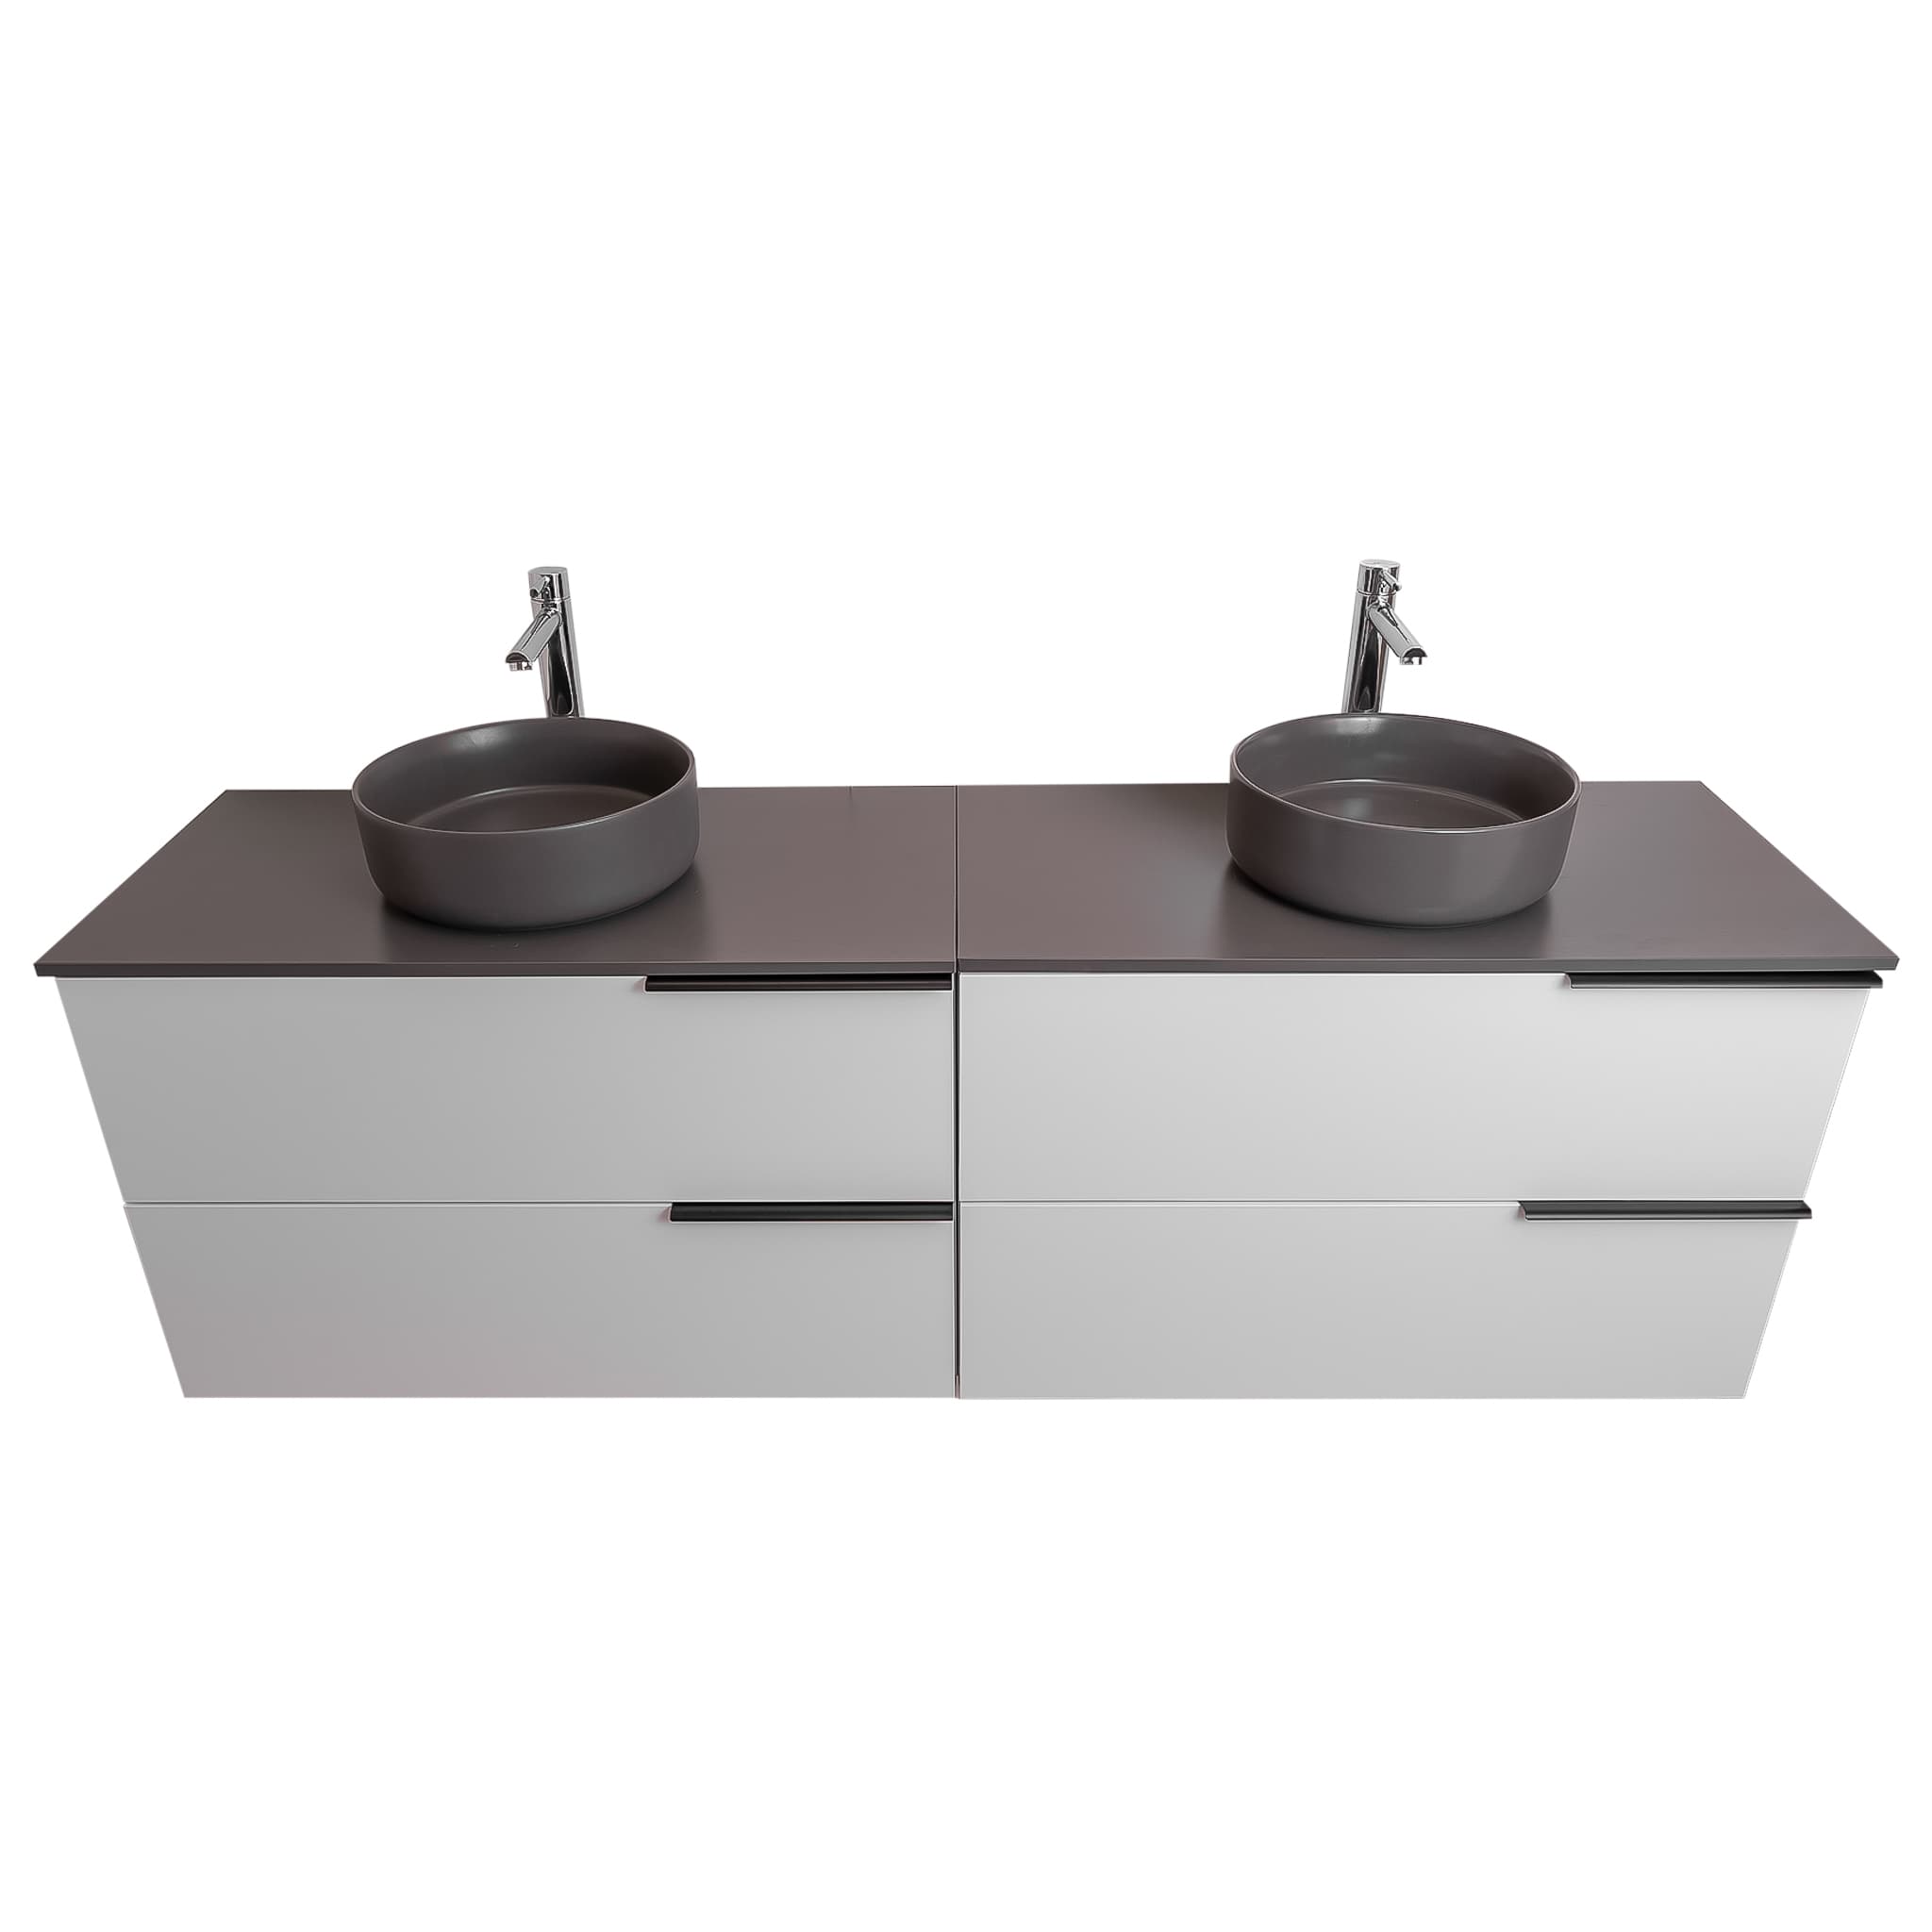 Mallorca 63 Matte White Cabinet, Ares Grey Ceniza Top And Two Ares Grey Ceniza Ceramic Basin, Wall Mounted Modern Vanity Set